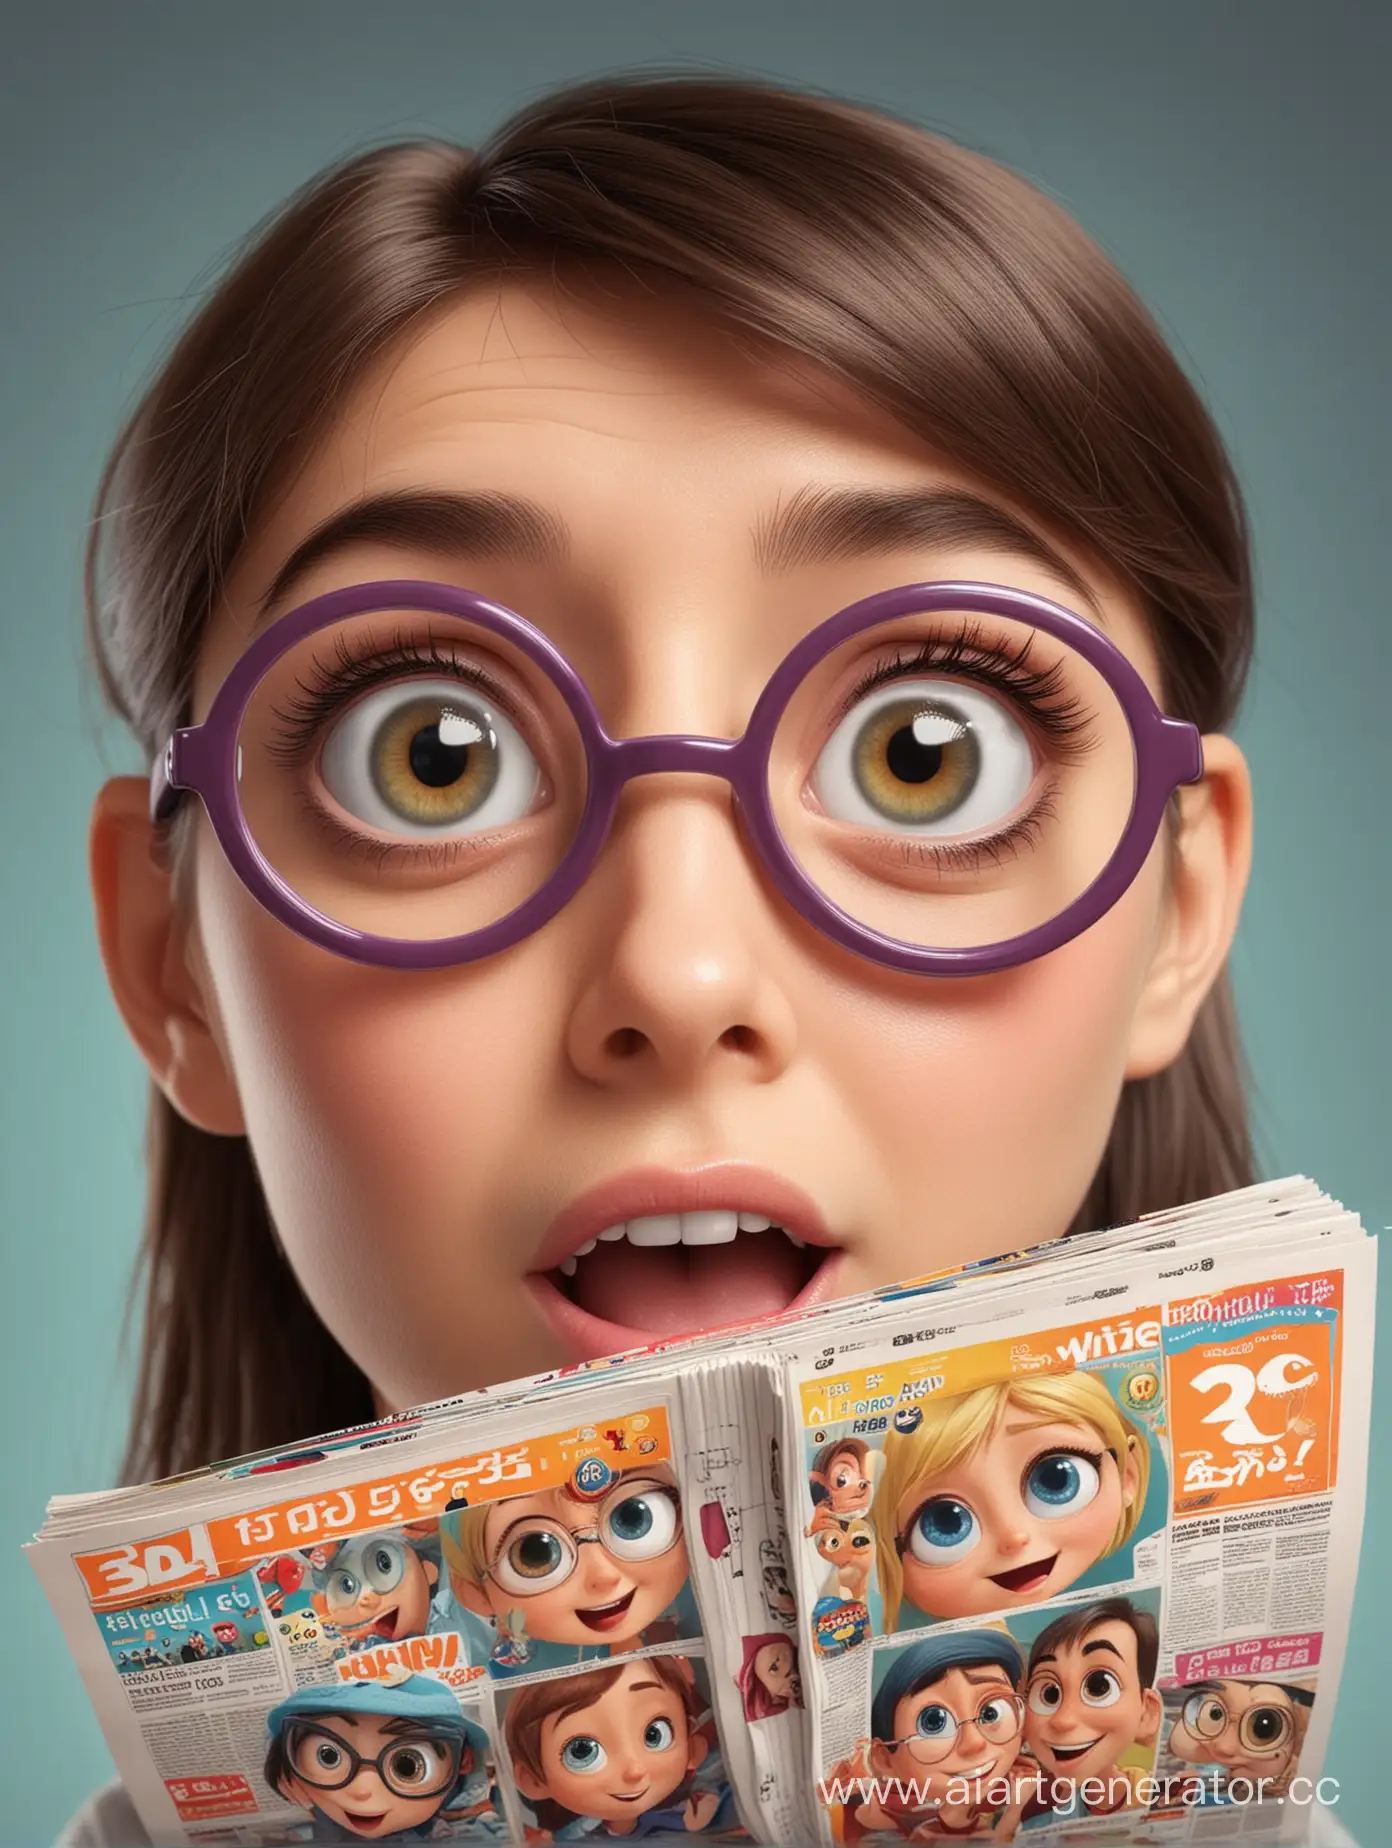 Cheerful-Cartoon-Characters-Enjoying-3D-Stereo-Pictures-Magazine